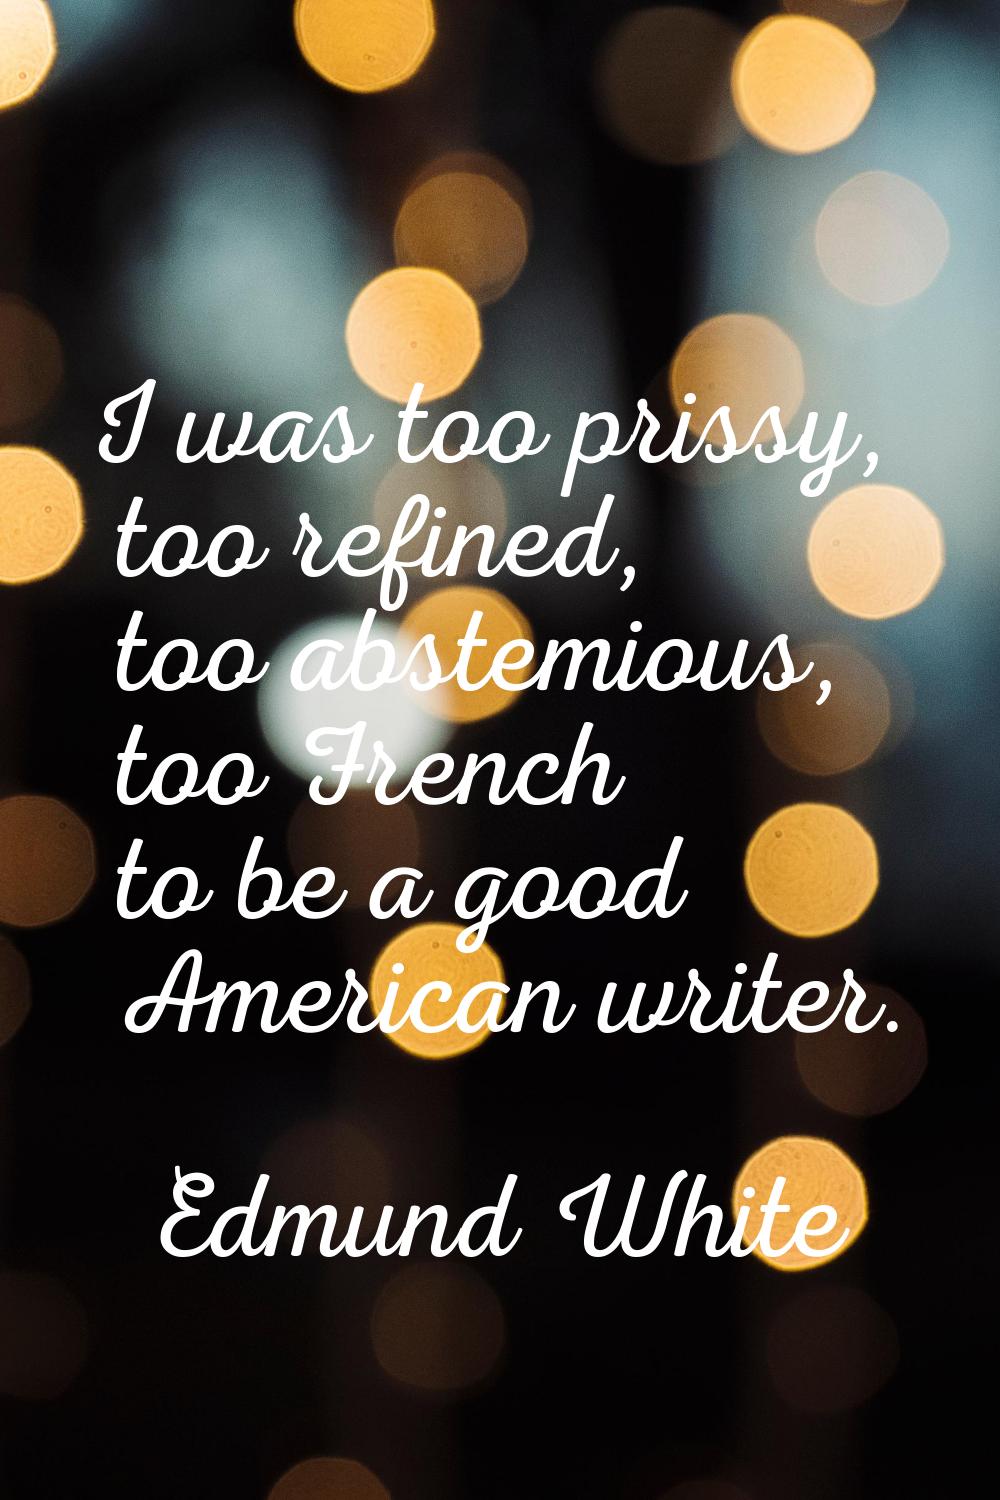 I was too prissy, too refined, too abstemious, too French to be a good American writer.